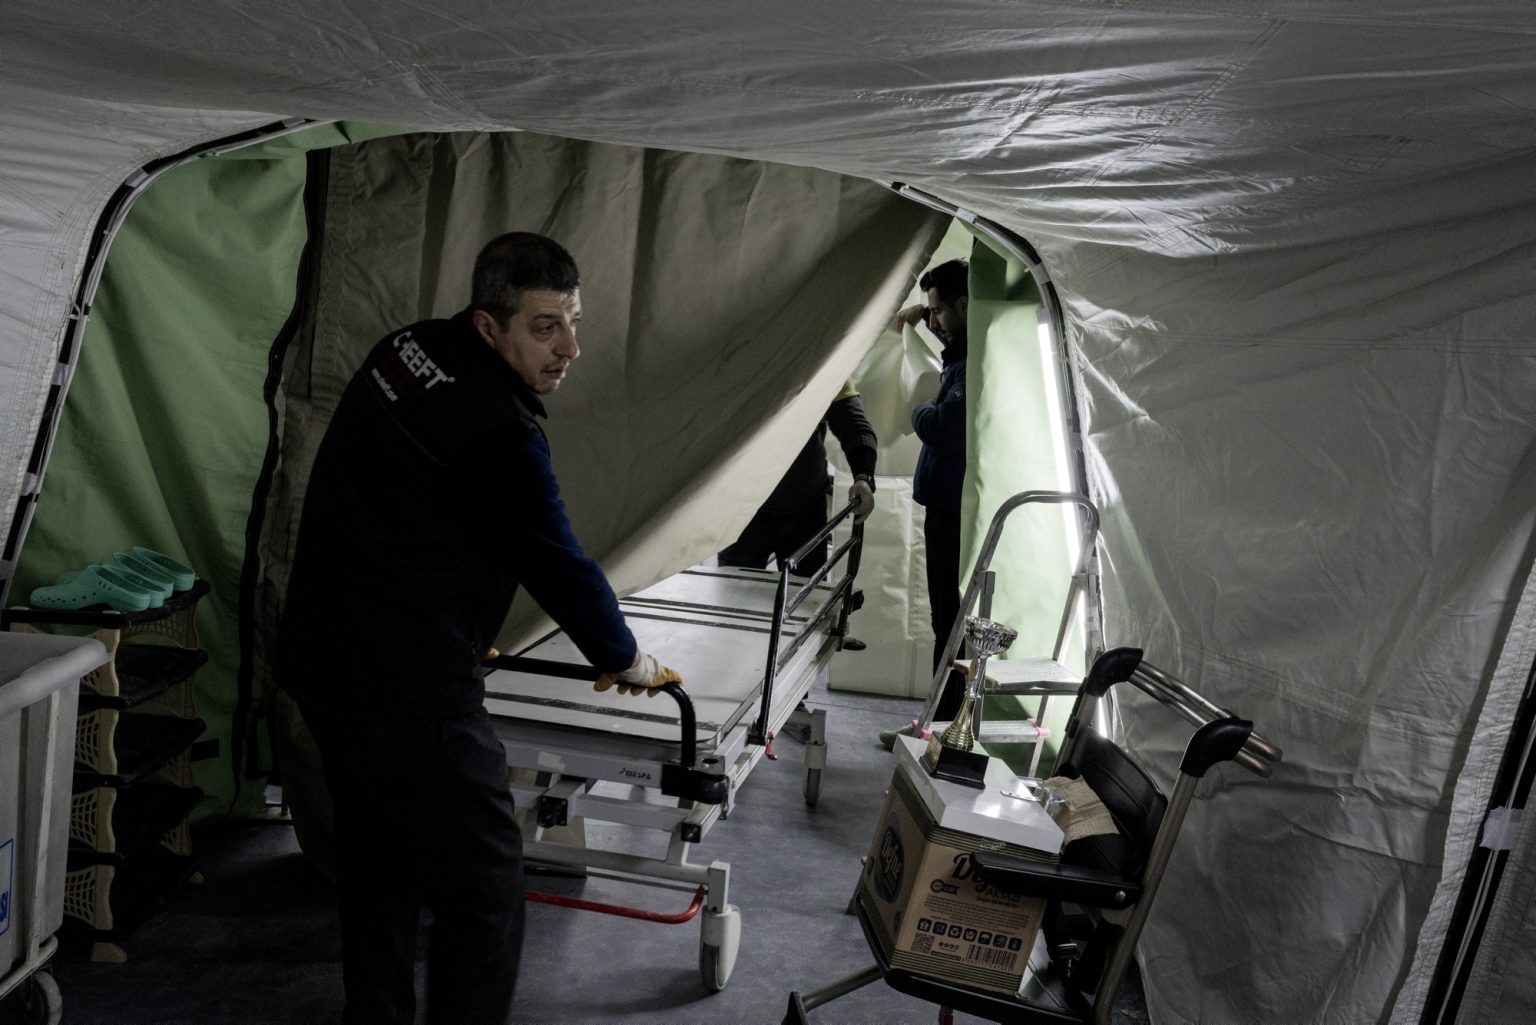 Antakya, Turkey, February 2023 - The aftermath of the earthquake that hit southern Turkey and northern Syria. Workers prepare medical supplies inside the tents of the field hospital set up in the town of Antakya. ><
Antakya, Turchia, febbraio 2023  Le conseguenze del terremoto che ha colpito la Turchia del Sud e la Siria del nord.